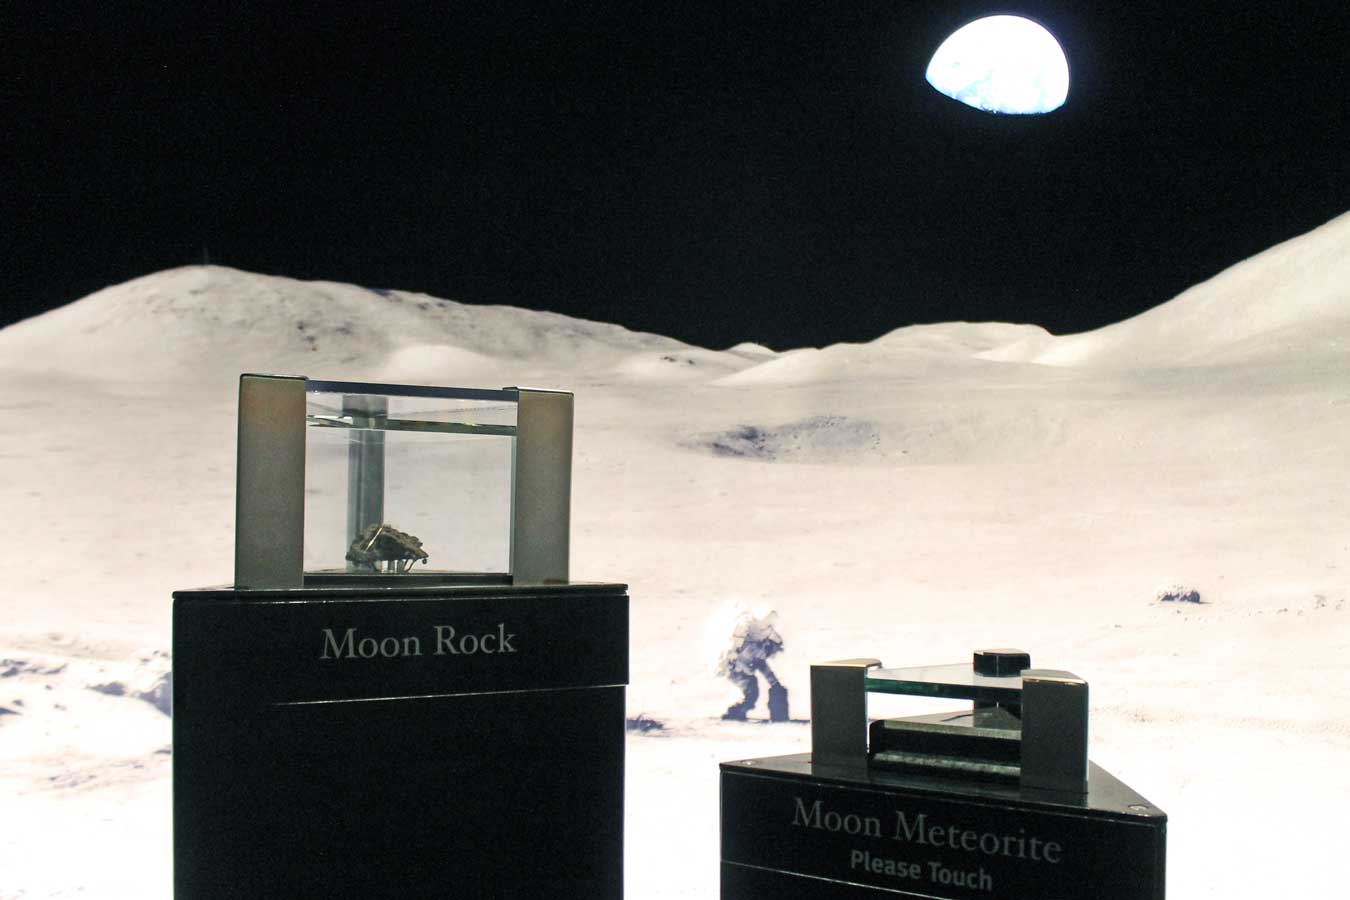 Moon Rock & Meteorite on display at the SPACE: A Journey To Our Future exhibit (Gerald R. Ford Presidential Museum in Grand Rapids, Michigan) /// Gerald R. Ford Presidential Museum: Legacy Of An Unelected President - (via Wading in Big Shoes)